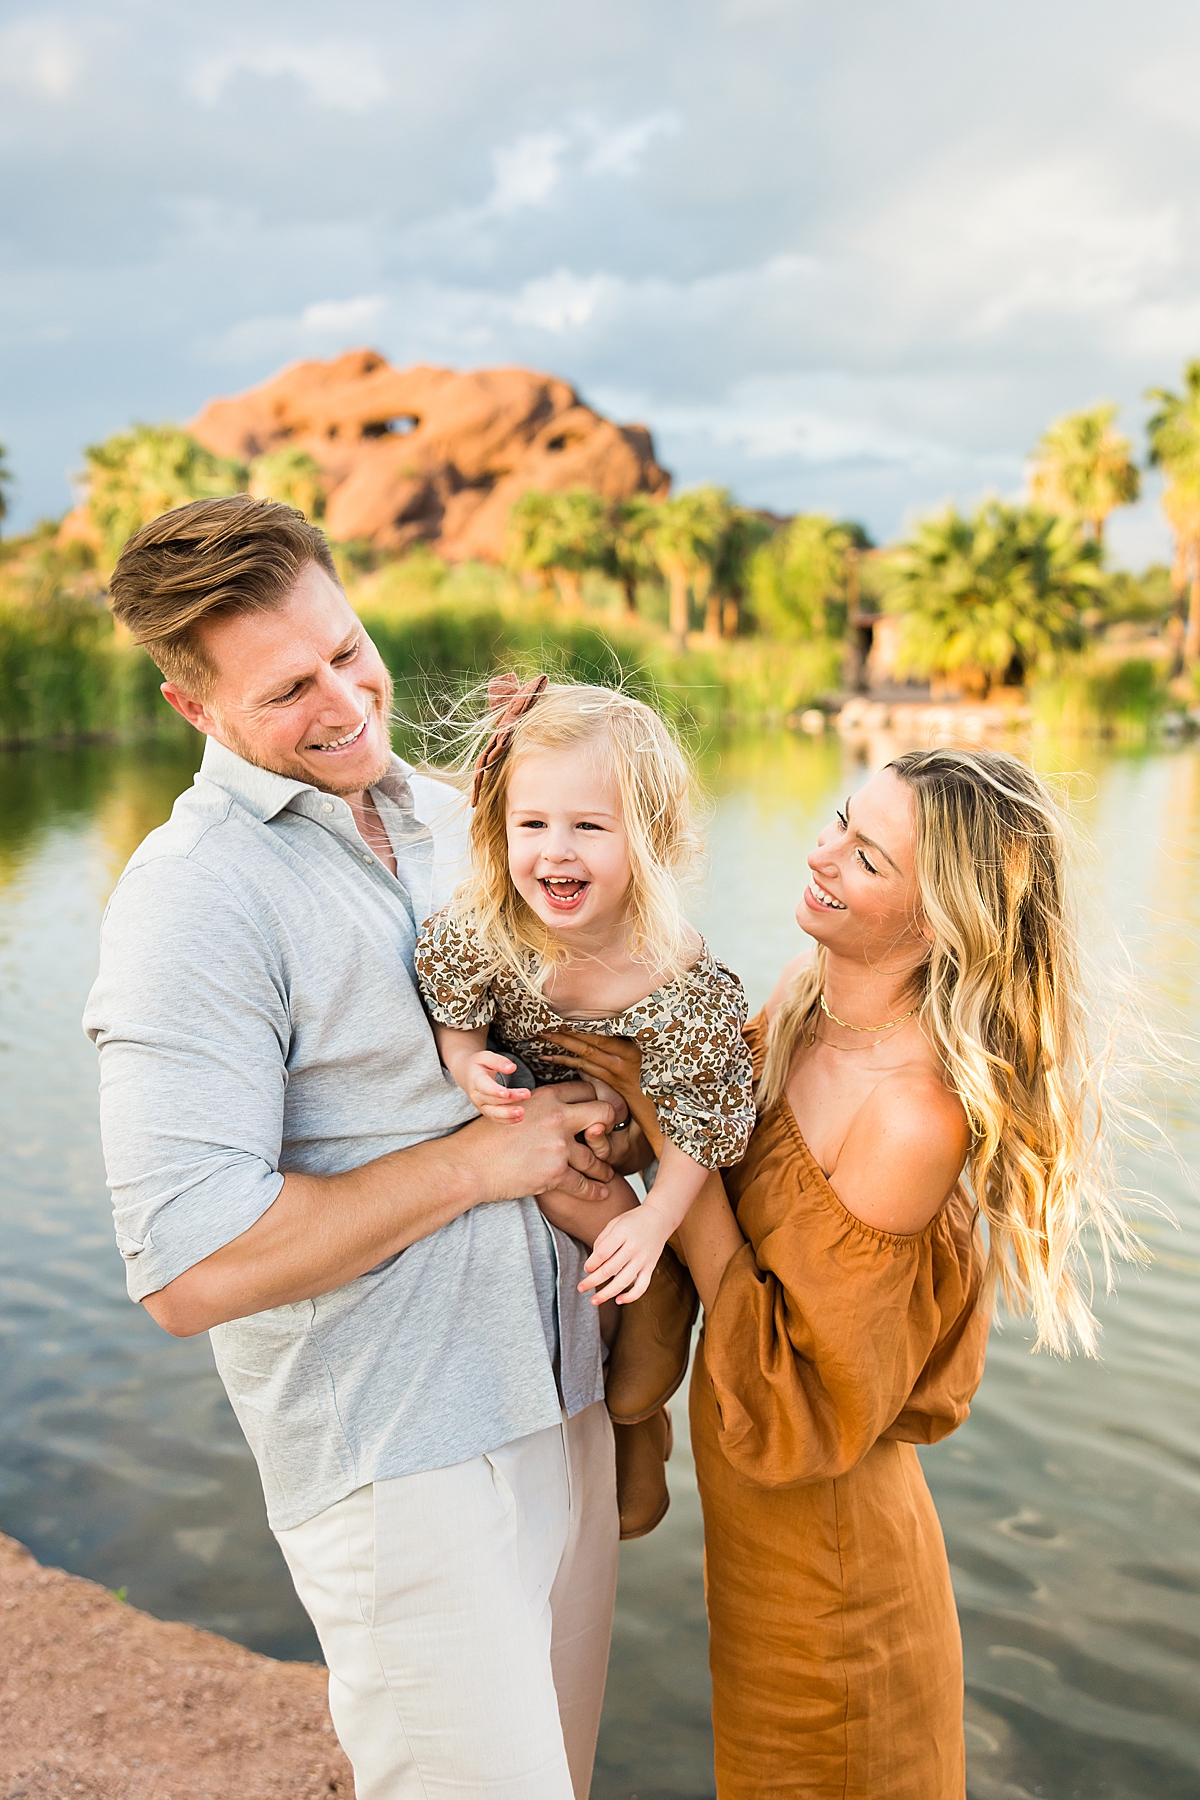 Leah Hope Photography | 5 Tips For A Stress Free Family Photo Session | Family Pictures | Scottsdale Phoenix Arizona Family Photography | Family Poses and Posing Ideas | Styling and Outfit Ideas for Family Photos 